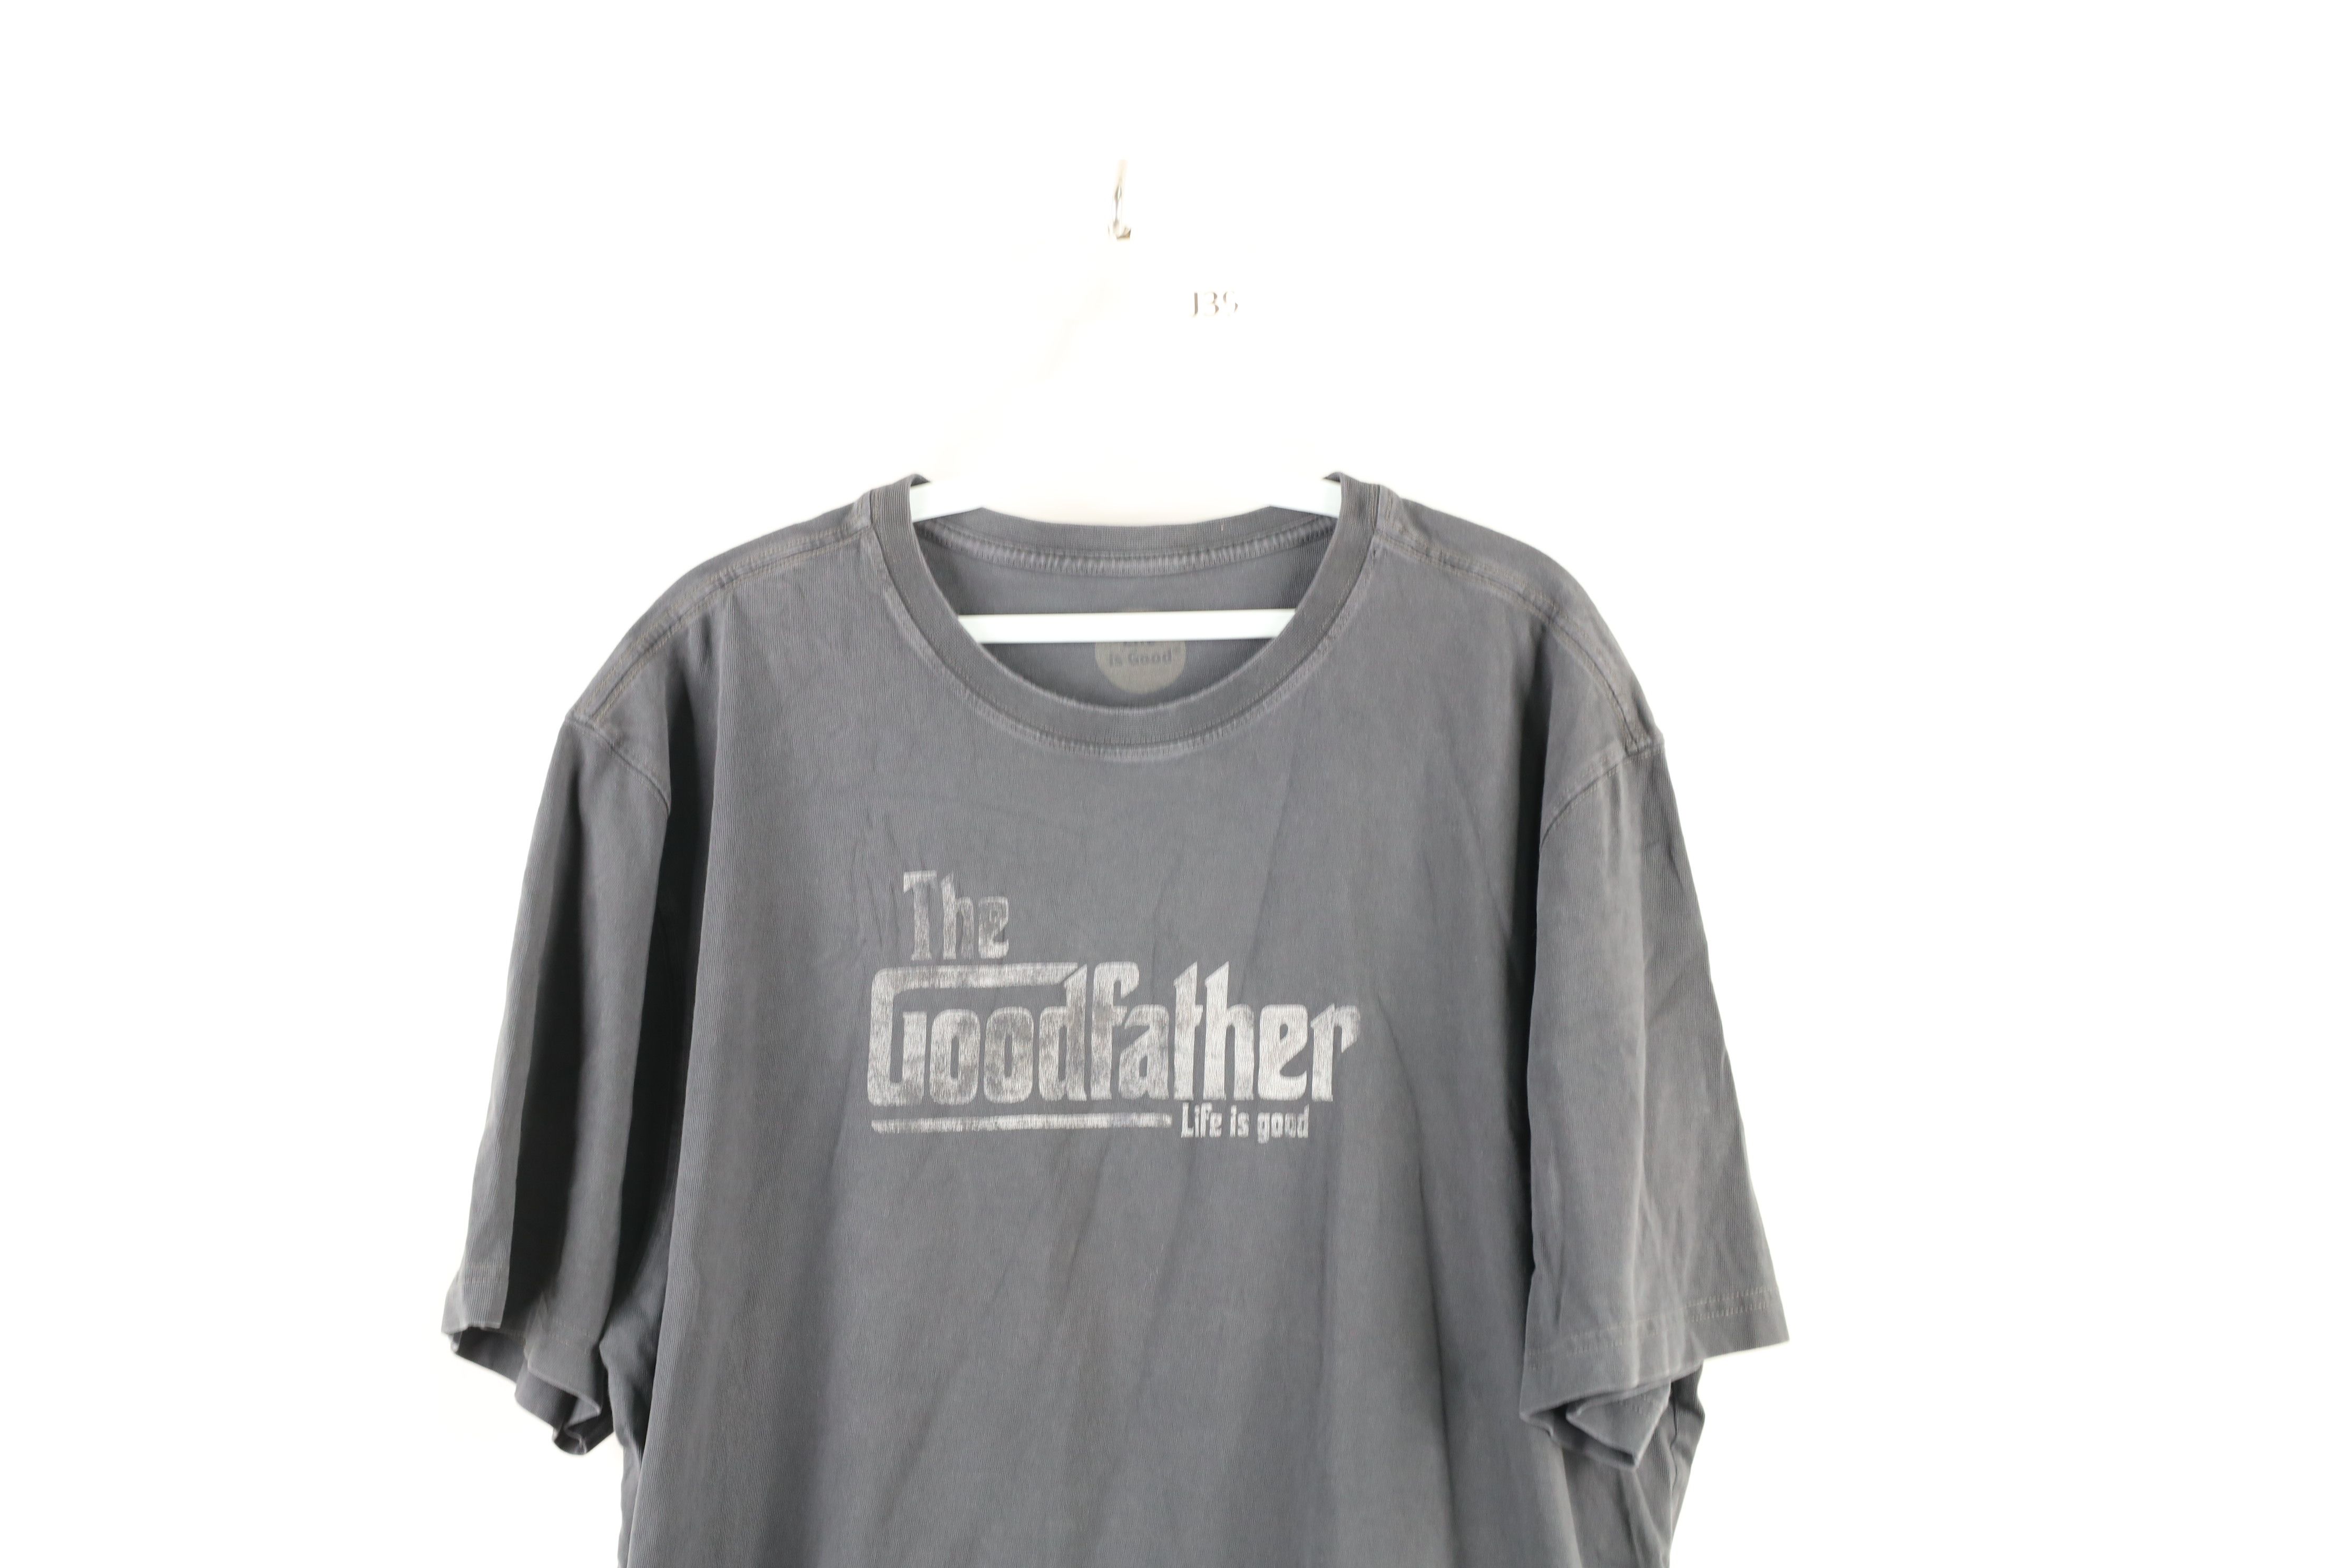 Vintage Life Is Good The Goodfather Short Sleeve T-Shirt Charcoa Size US XL / EU 56 / 4 - 2 Preview